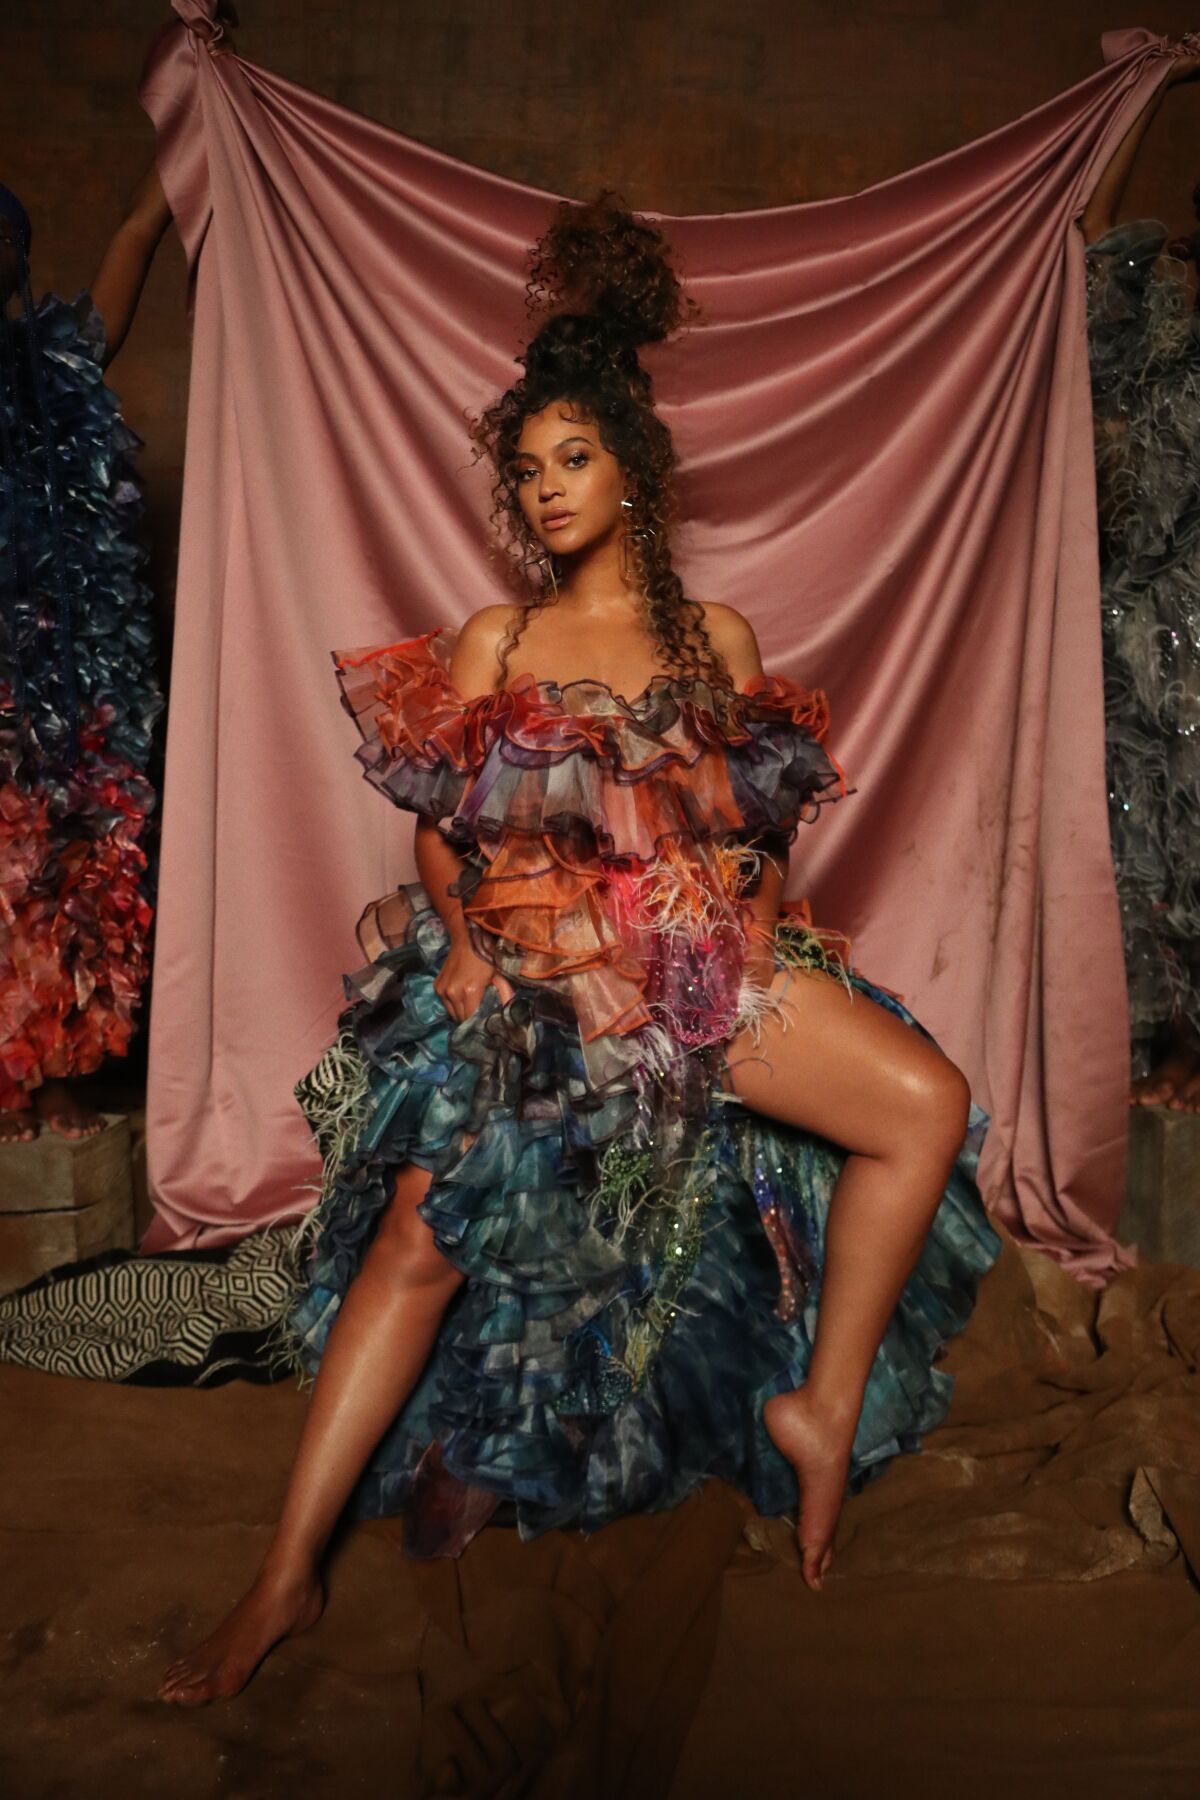 Beyonce wears a colorful ruffled dress by Mary Katrantzou in "Black Is King."